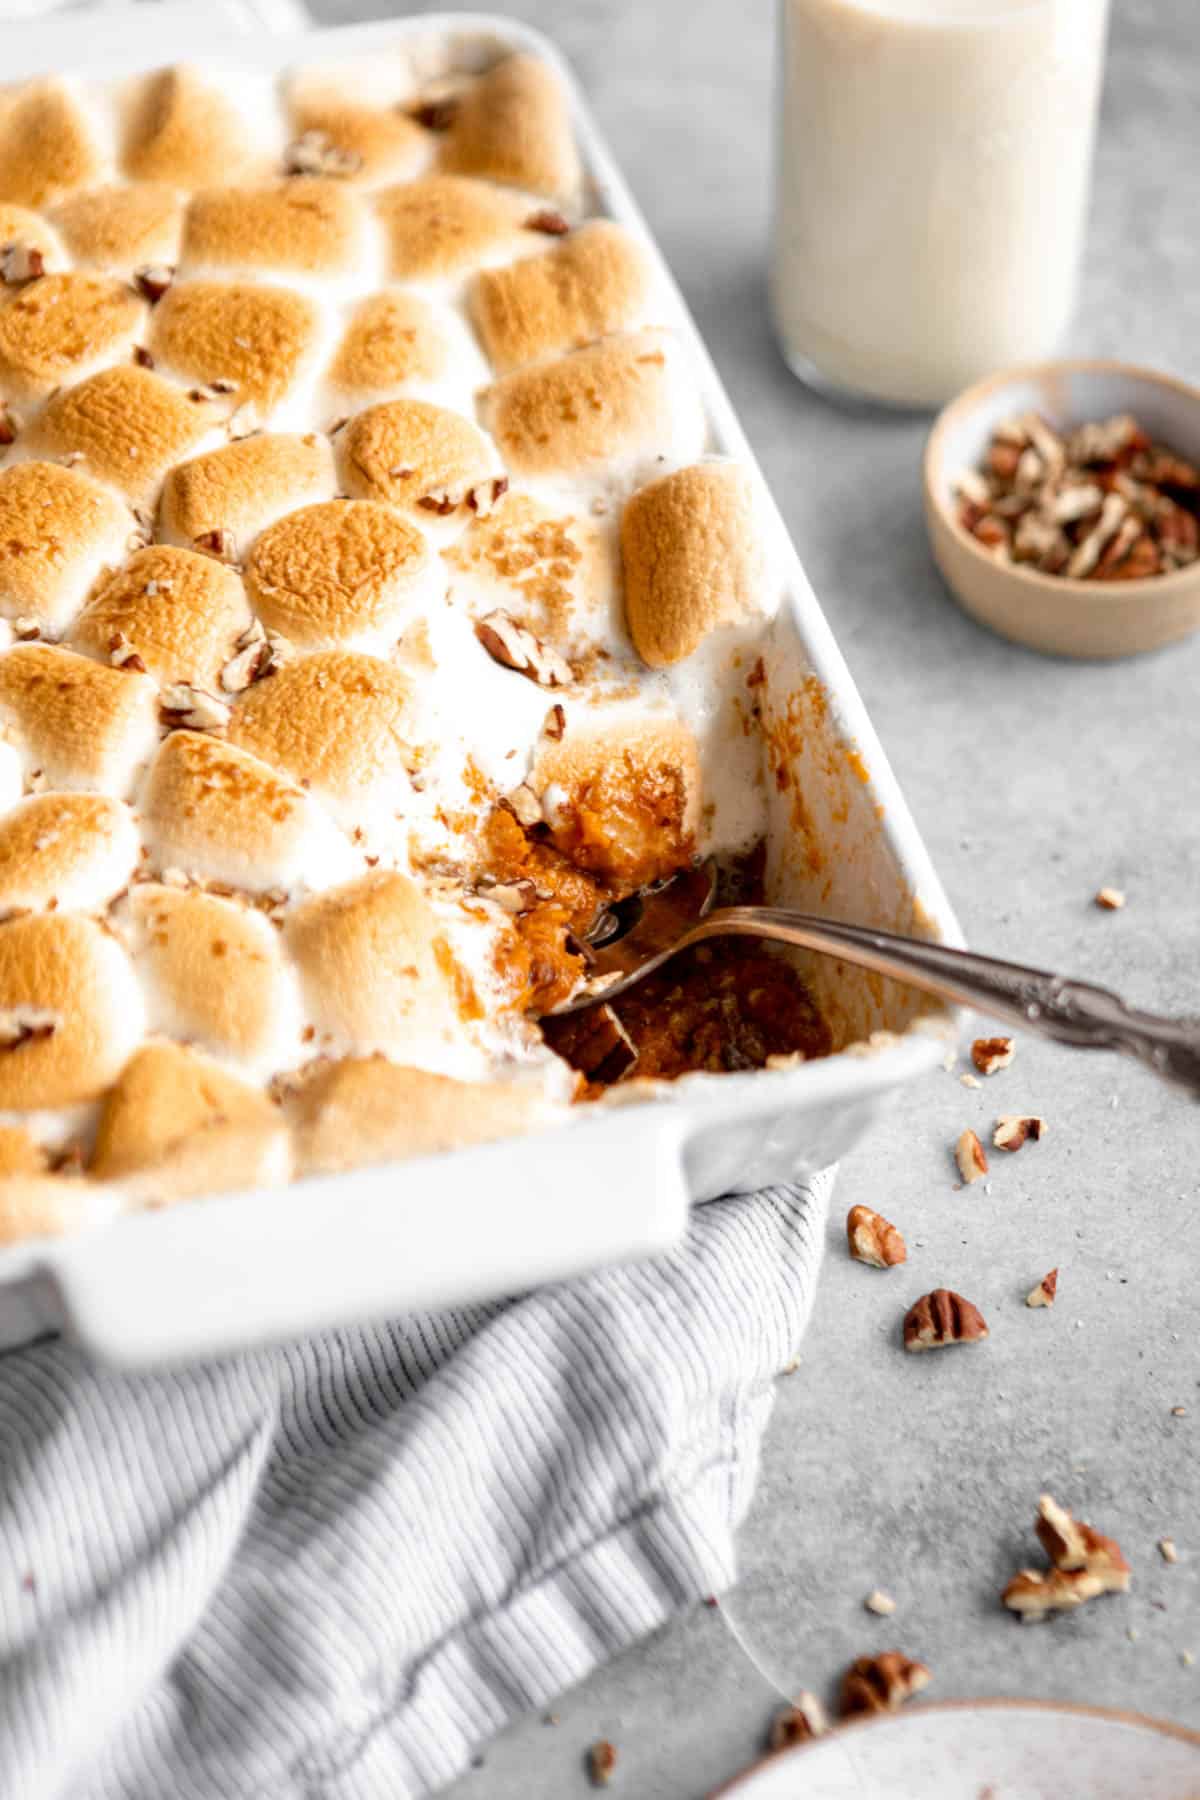 angled view of the casserole with marshmallows on top and a spoon on the side